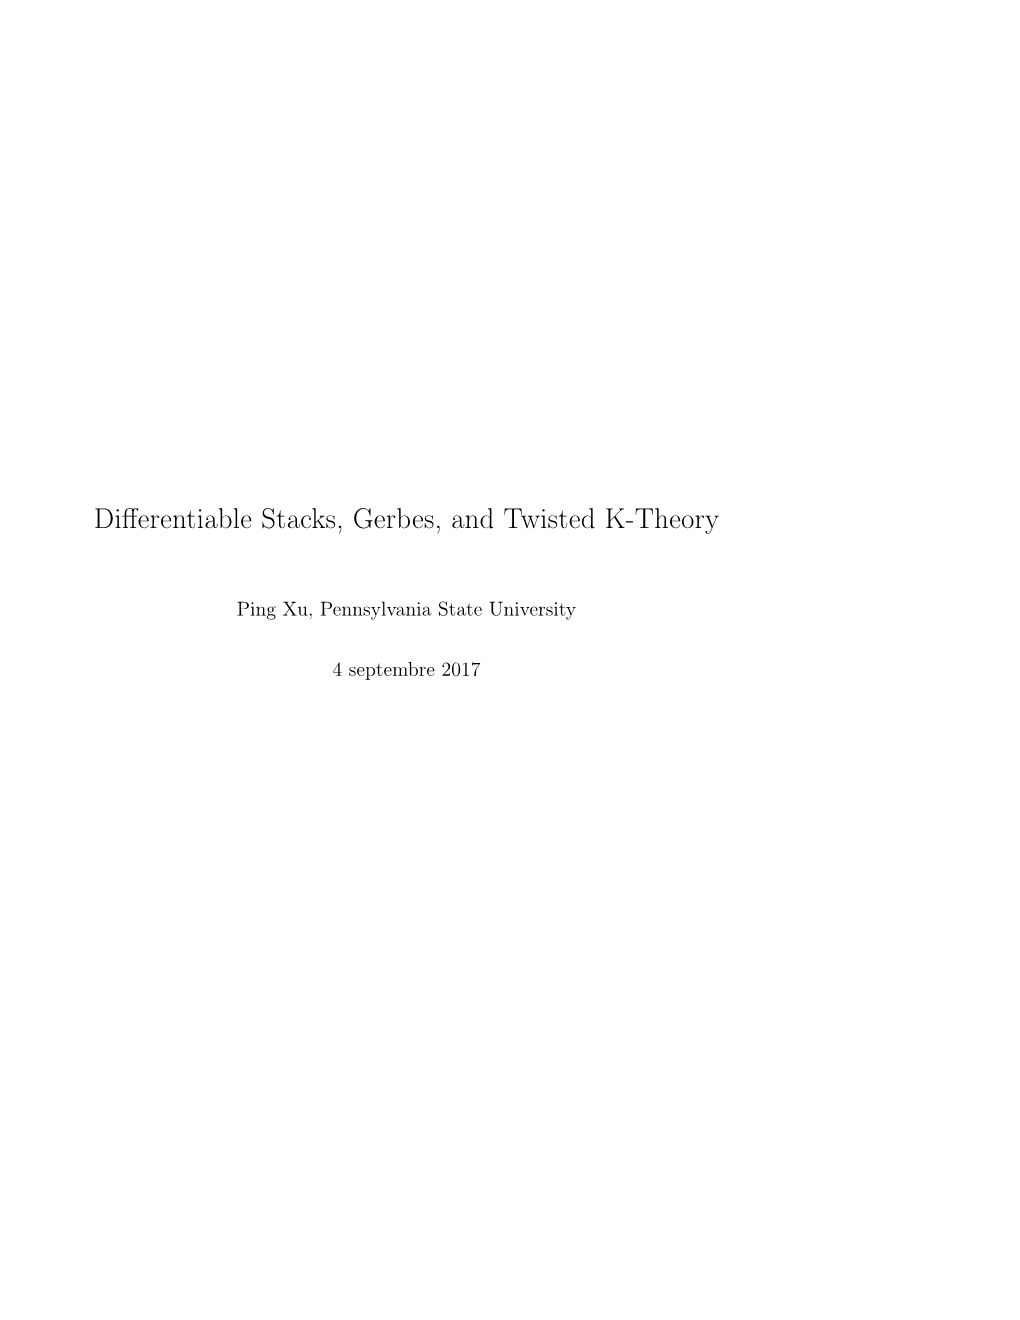 Differentiable Stacks, Gerbes, and Twisted K-Theory